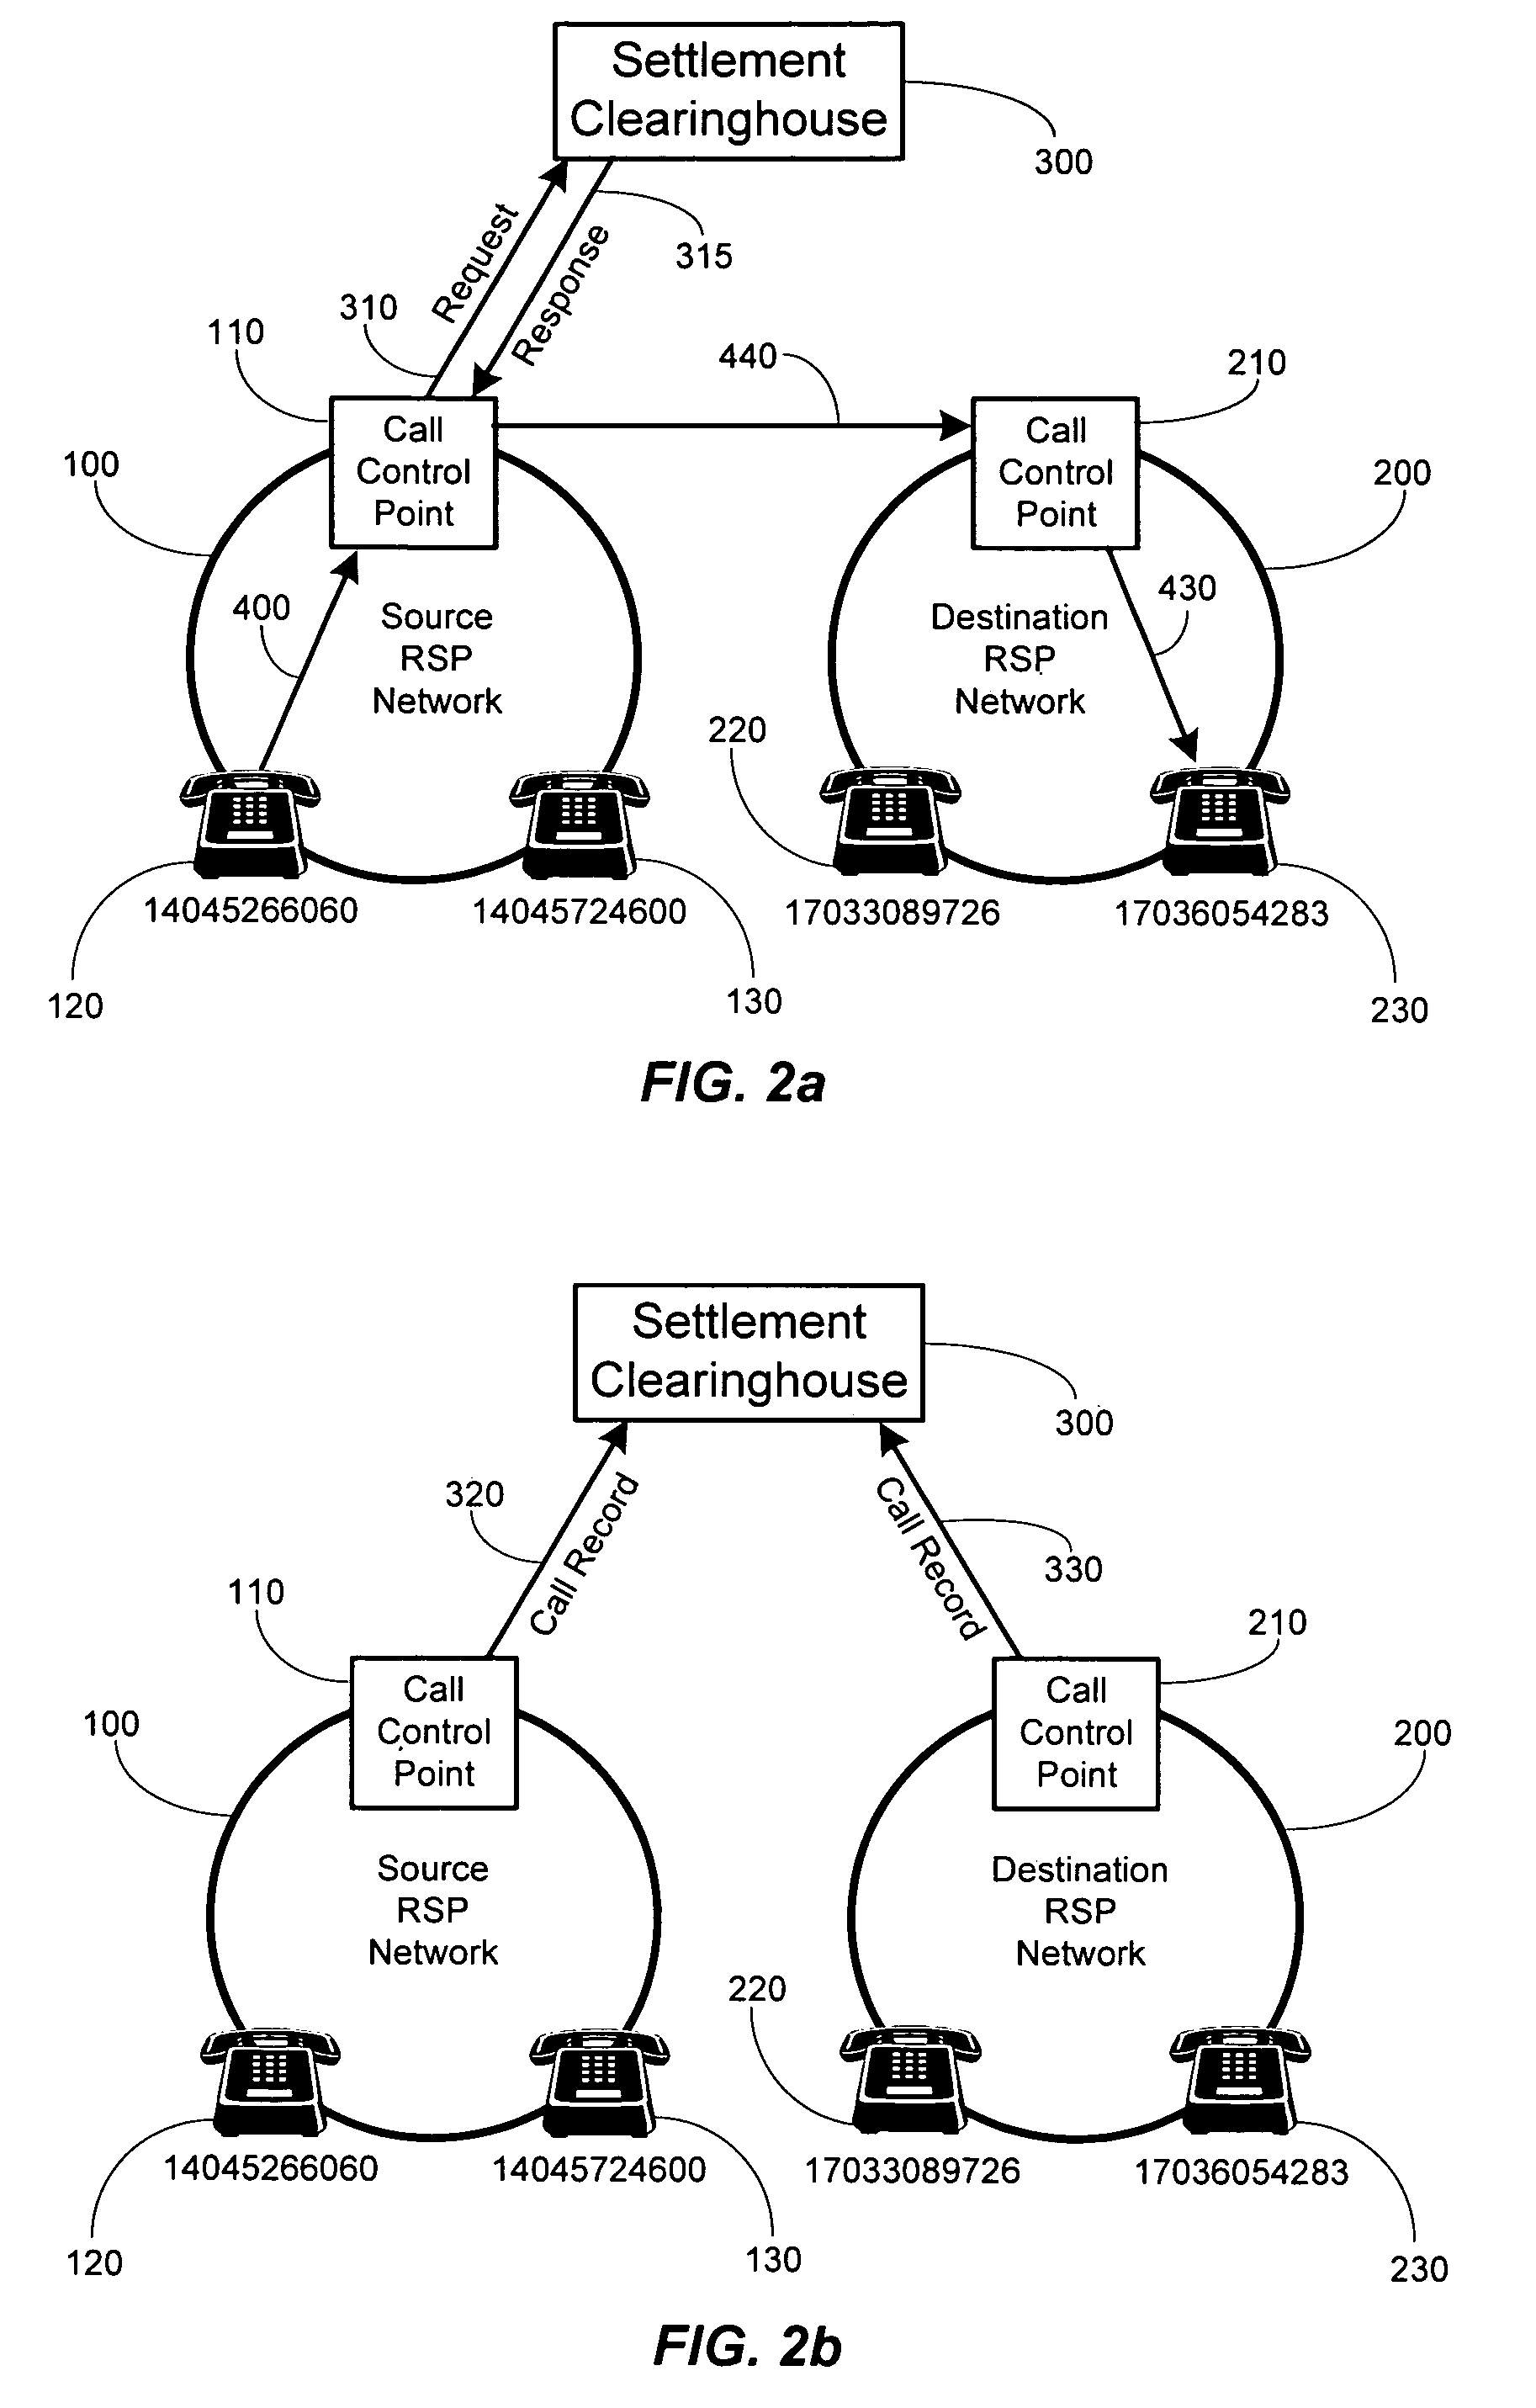 Method and system for securely authorized VoIP interconnections between anonymous peers of VoIP networks